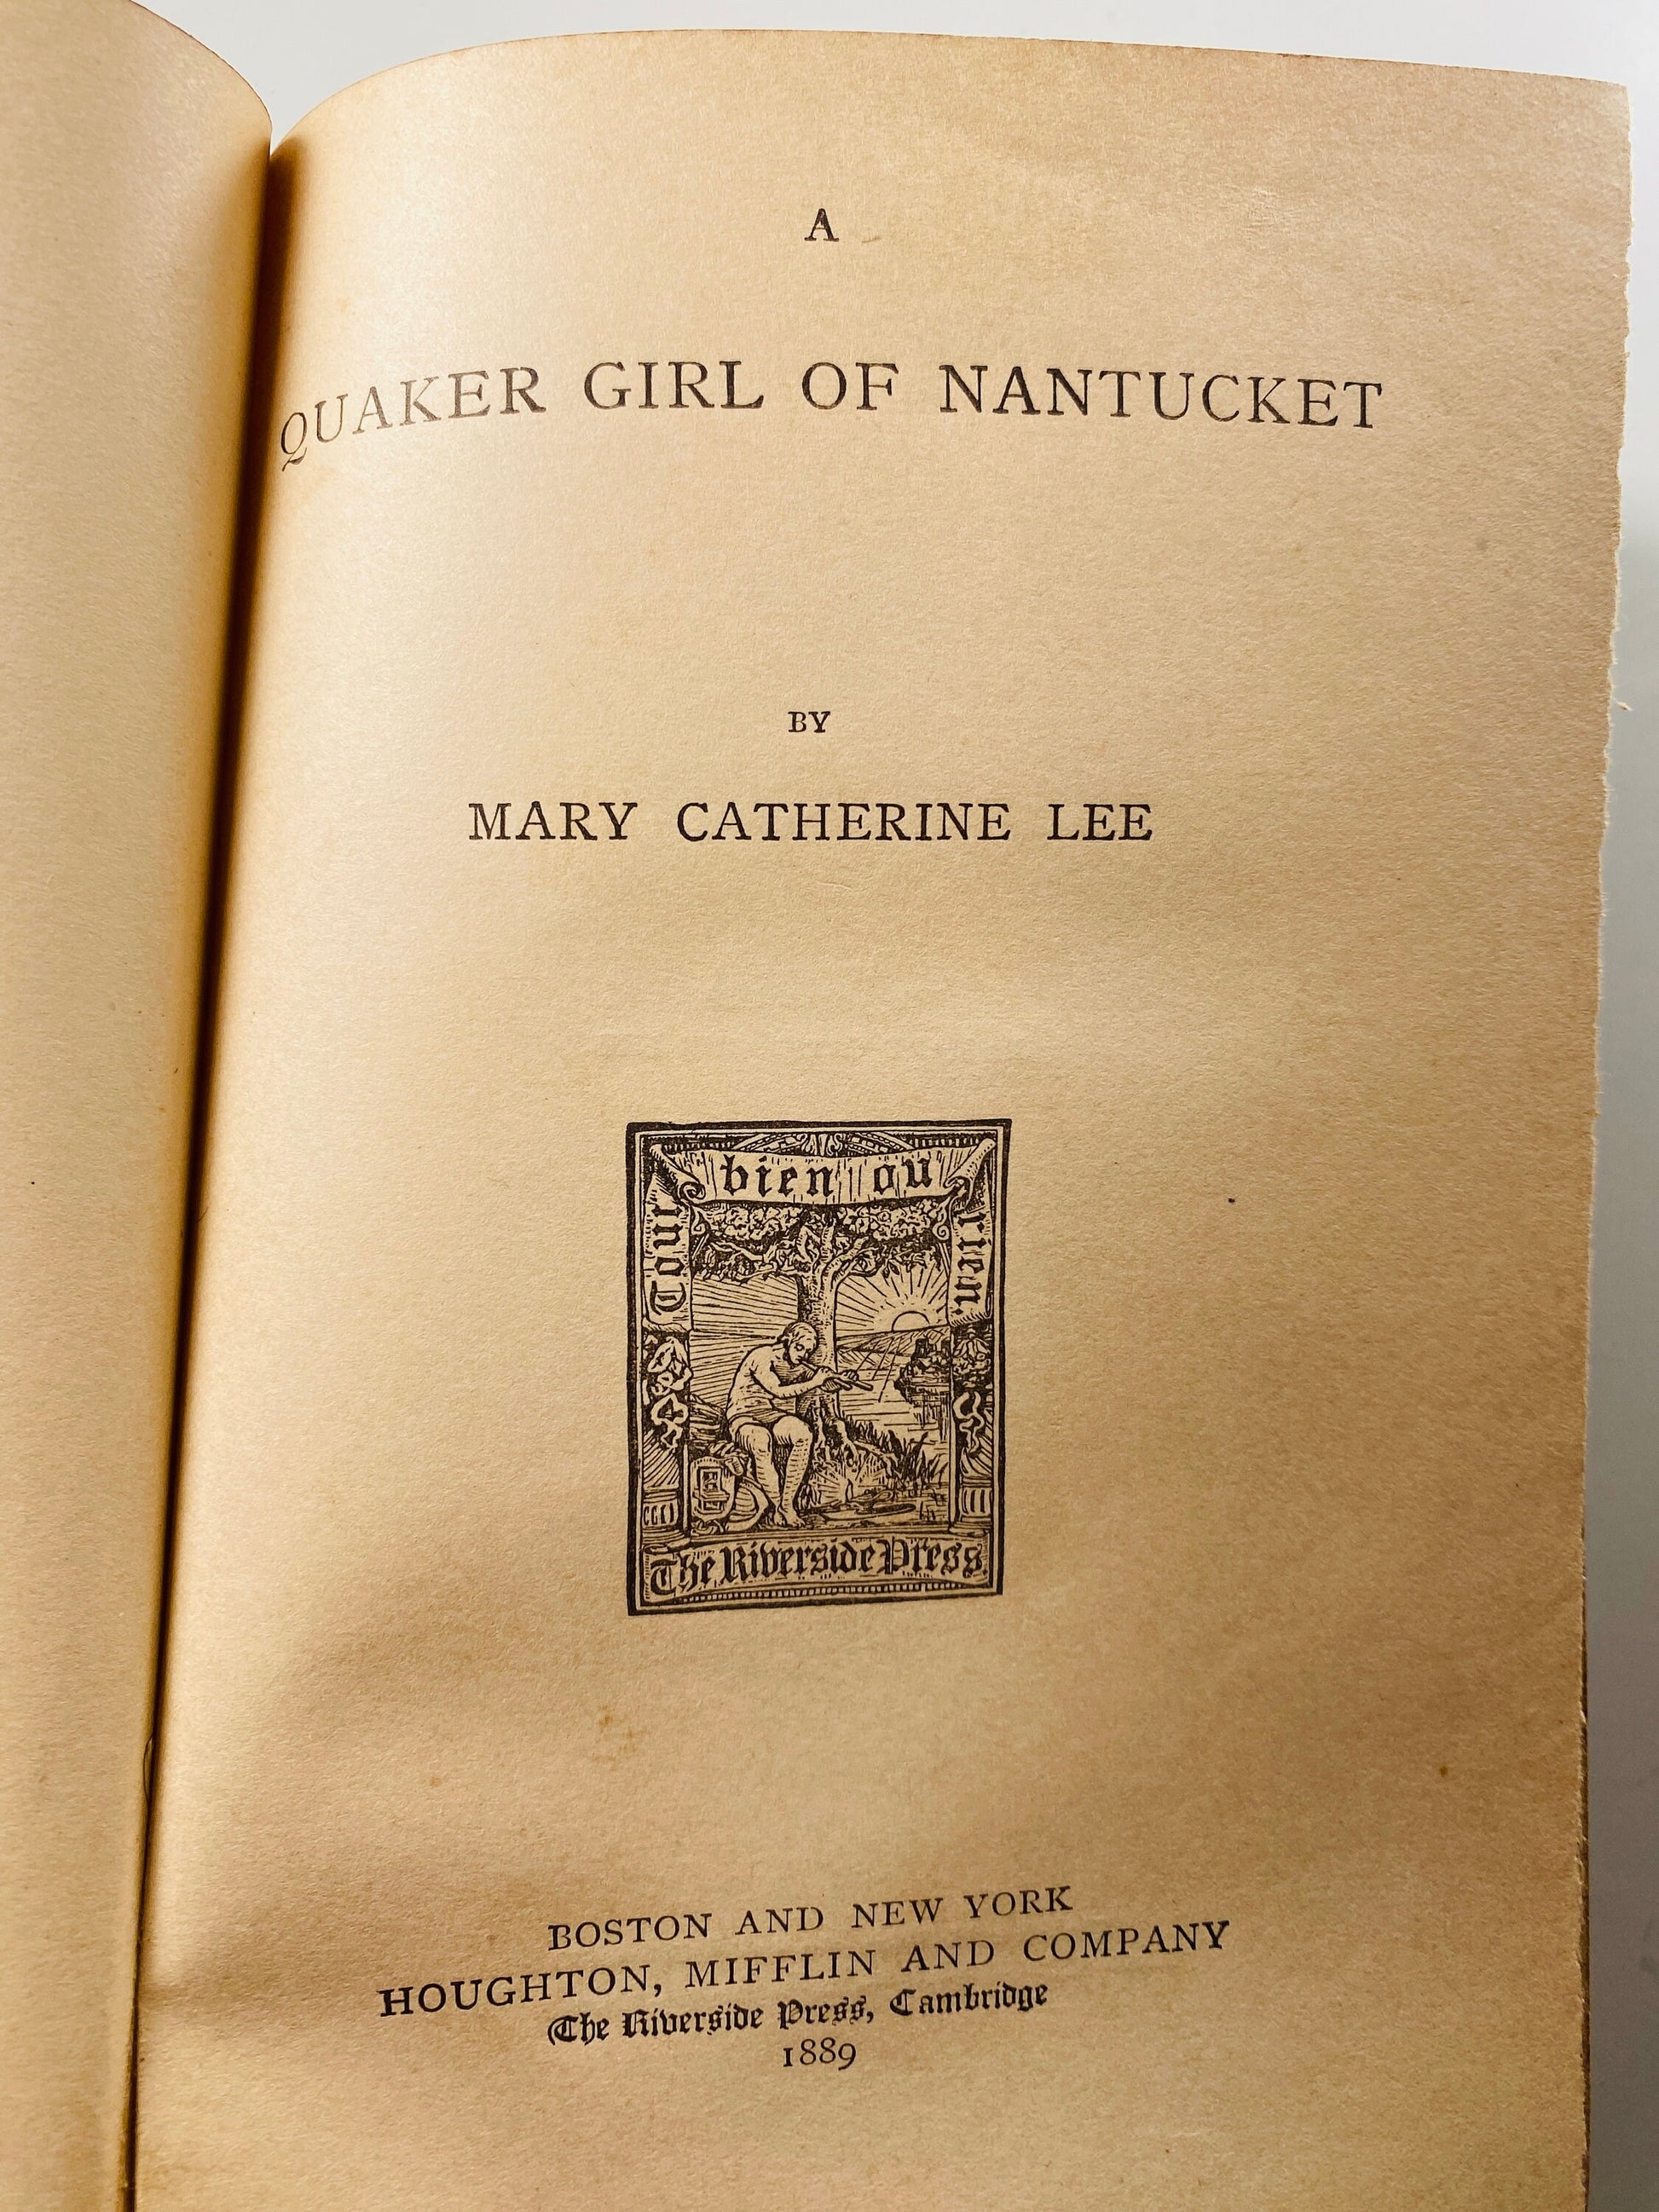 Quaker Girl of Nantucket FIRST EDITION vintage book by Catherine Mary Lee circa 1889 about Nantucket, its quaintness and simplicity